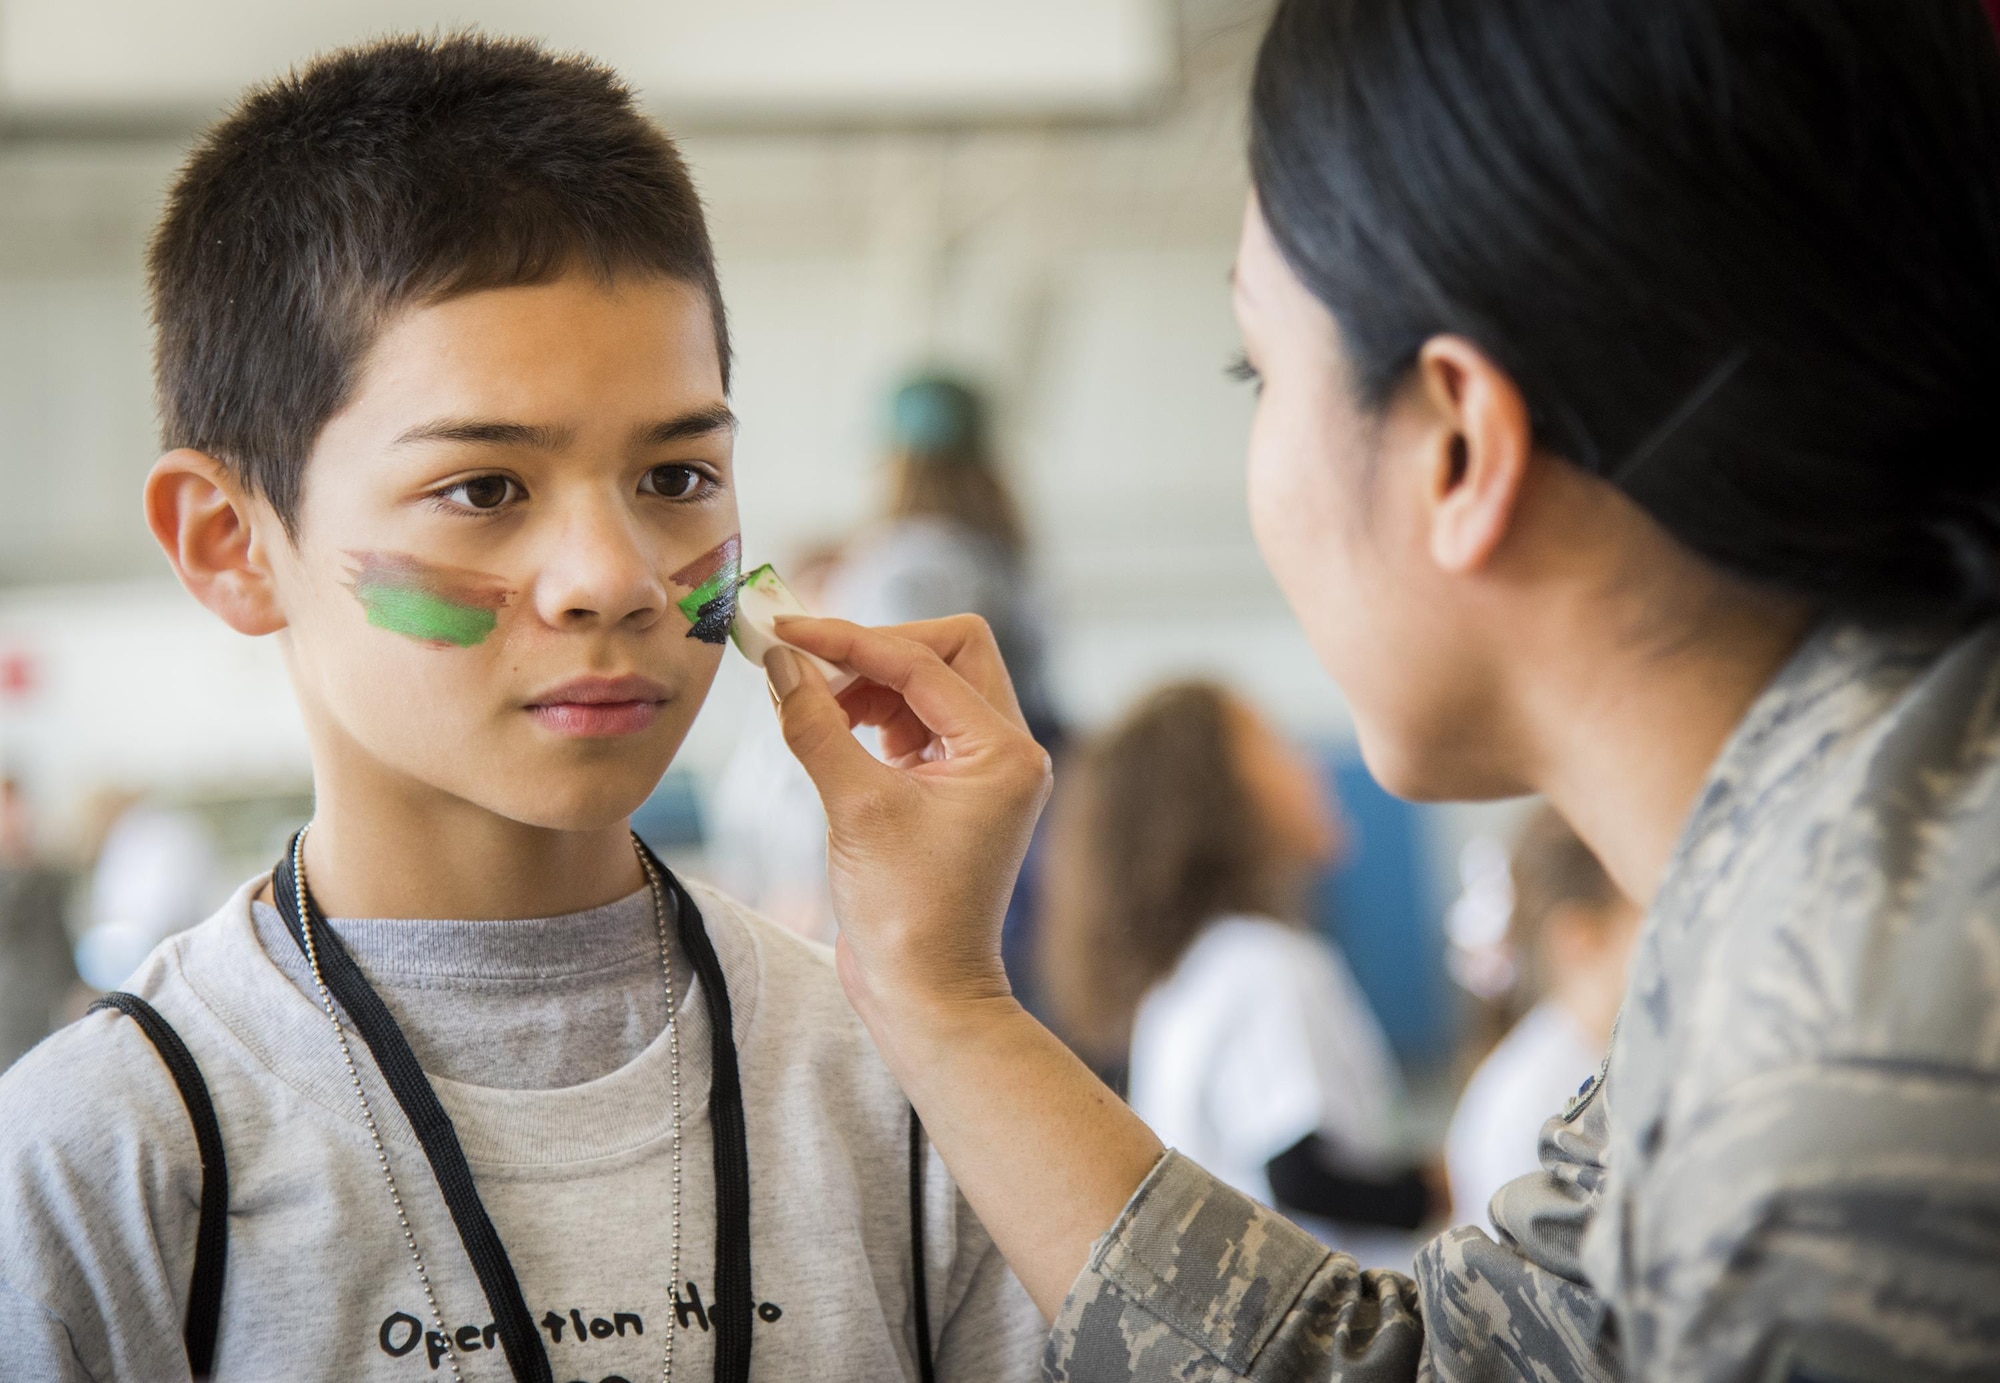 A new recruit gets his war paint applied during the Operation Hero event Oct. 22 at Eglin Air Force Base, Fla.  More than 100 kids participated in the mock deployment experience created to give military children a glimpse of what their loved ones go through when they leave home. The kids went through a deployment line to get their dog tags and “immunizations” before they were briefed by the commander and shipped off to a deployed location. There, they participated in various activities and demonstrations by local base agencies. (U.S. Air Force photo/Samuel King Jr.)